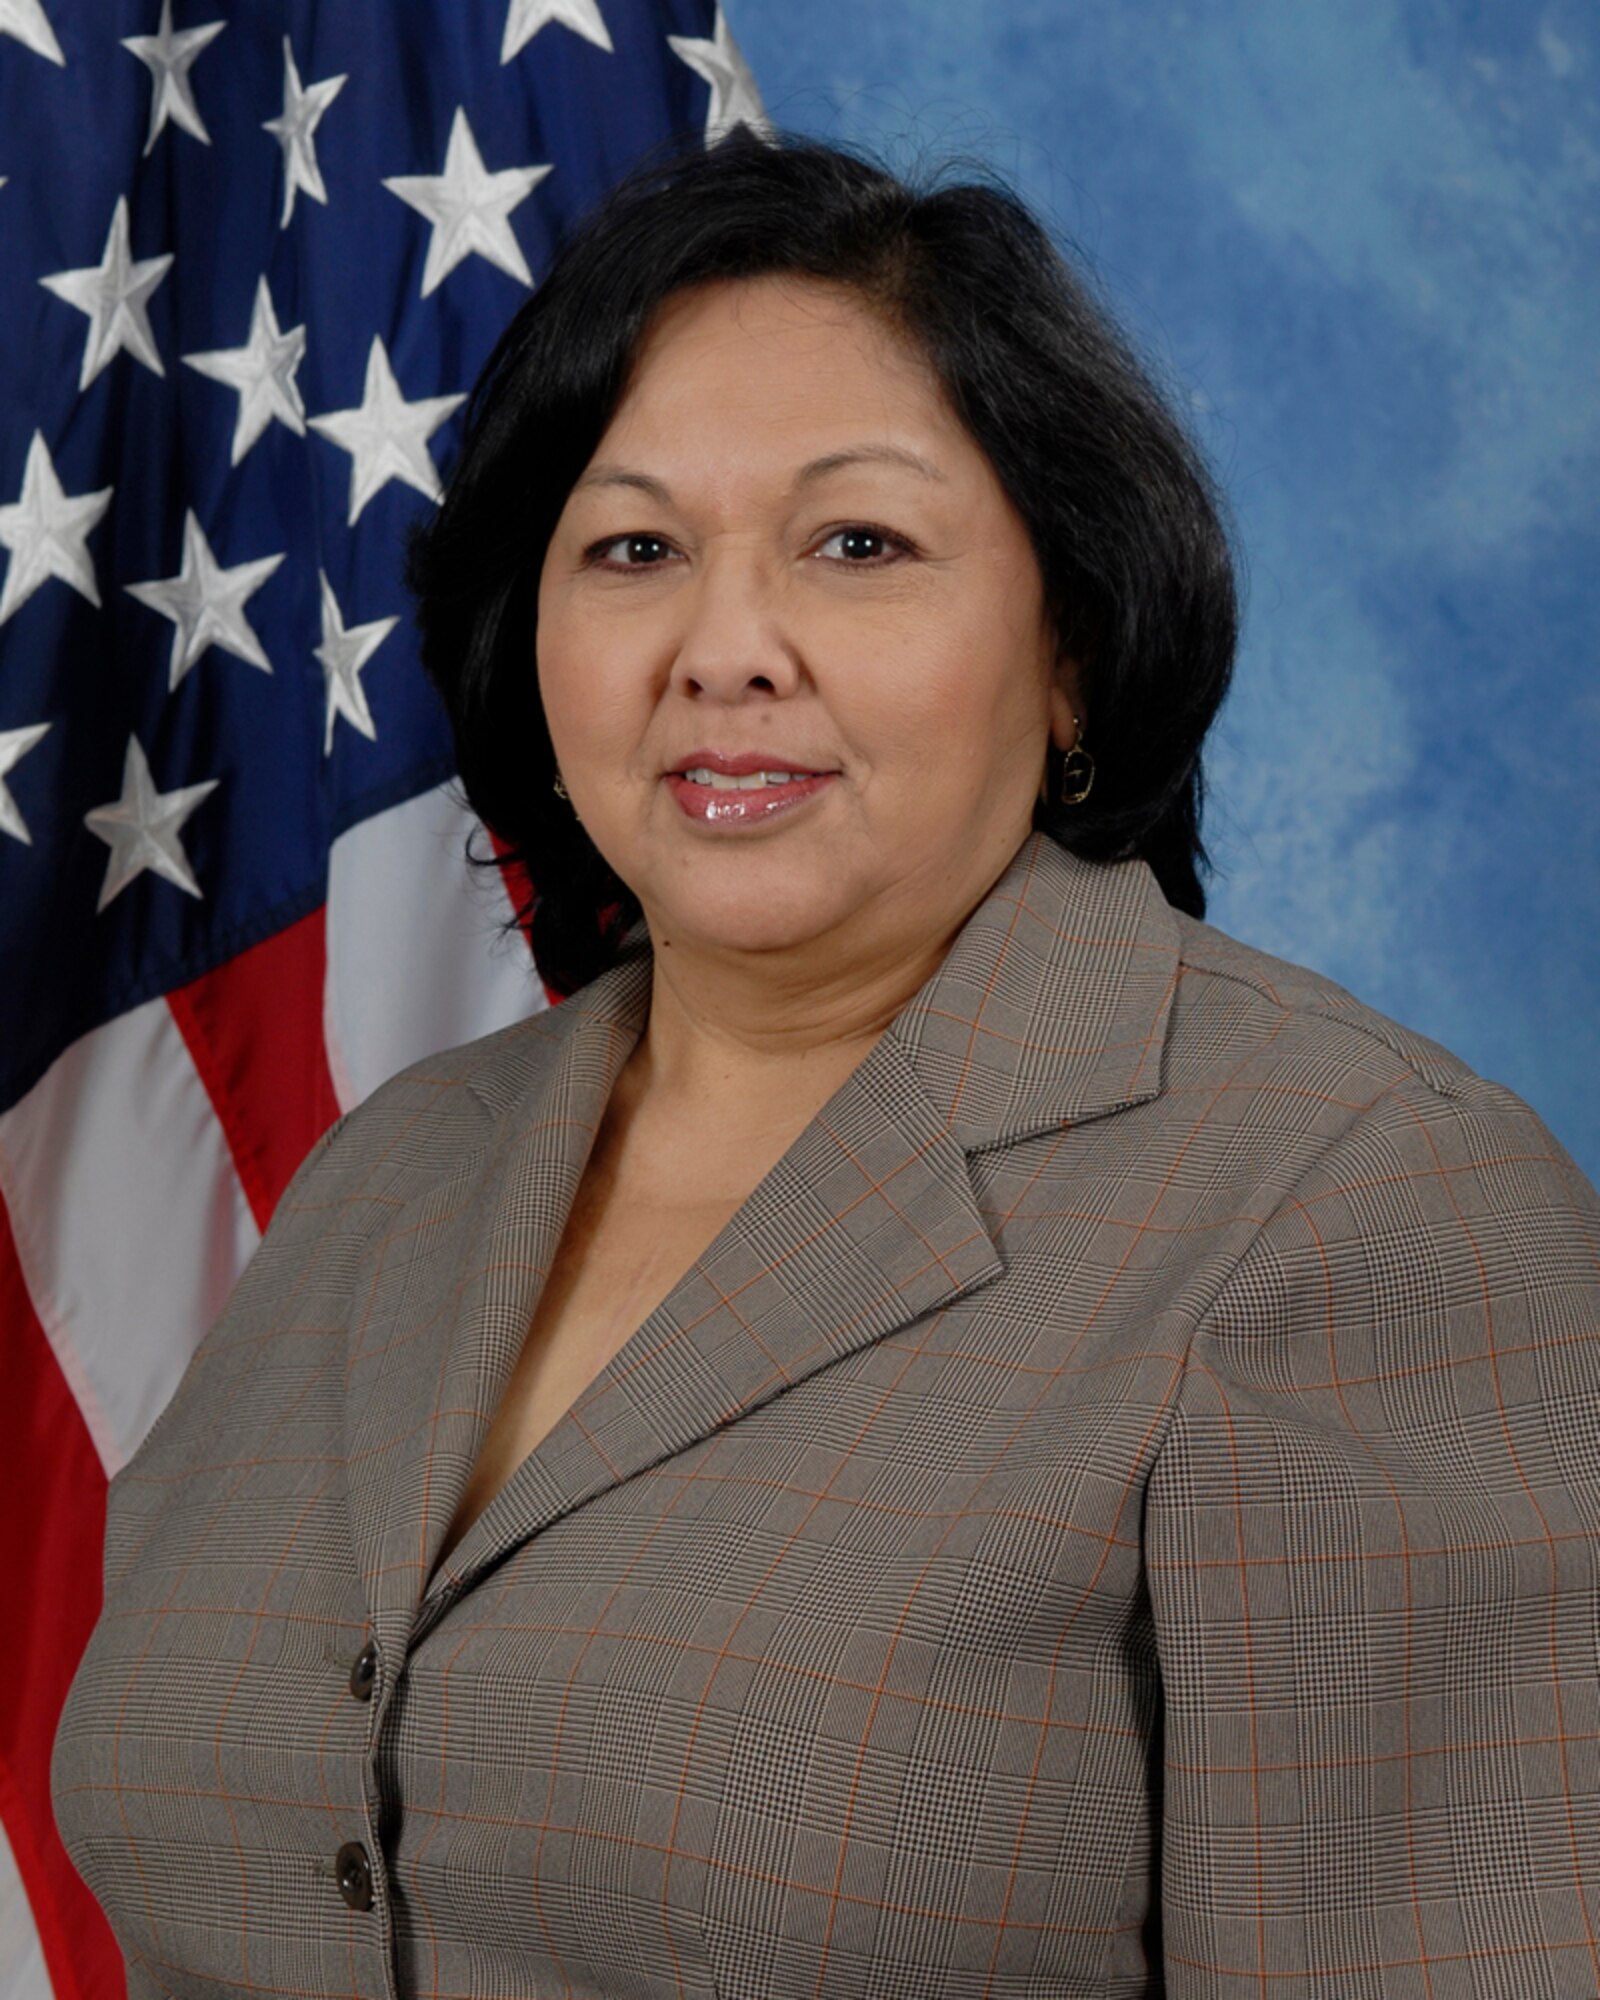 Janie Reyes, 17th Training Support Squadron is the 2009 Civilian Category I of the Year for the 17th Training Wing, Goodfellow AFB, Texas. The annual awards program recognizes both civilians and members in 16 categories of the Air Force, Army, Navy and Marines who are assigned to the wing, for their significant contributions to the 17 TRW, the community and mission. (U.S. Air Force photo/ Lou Czarnecki)